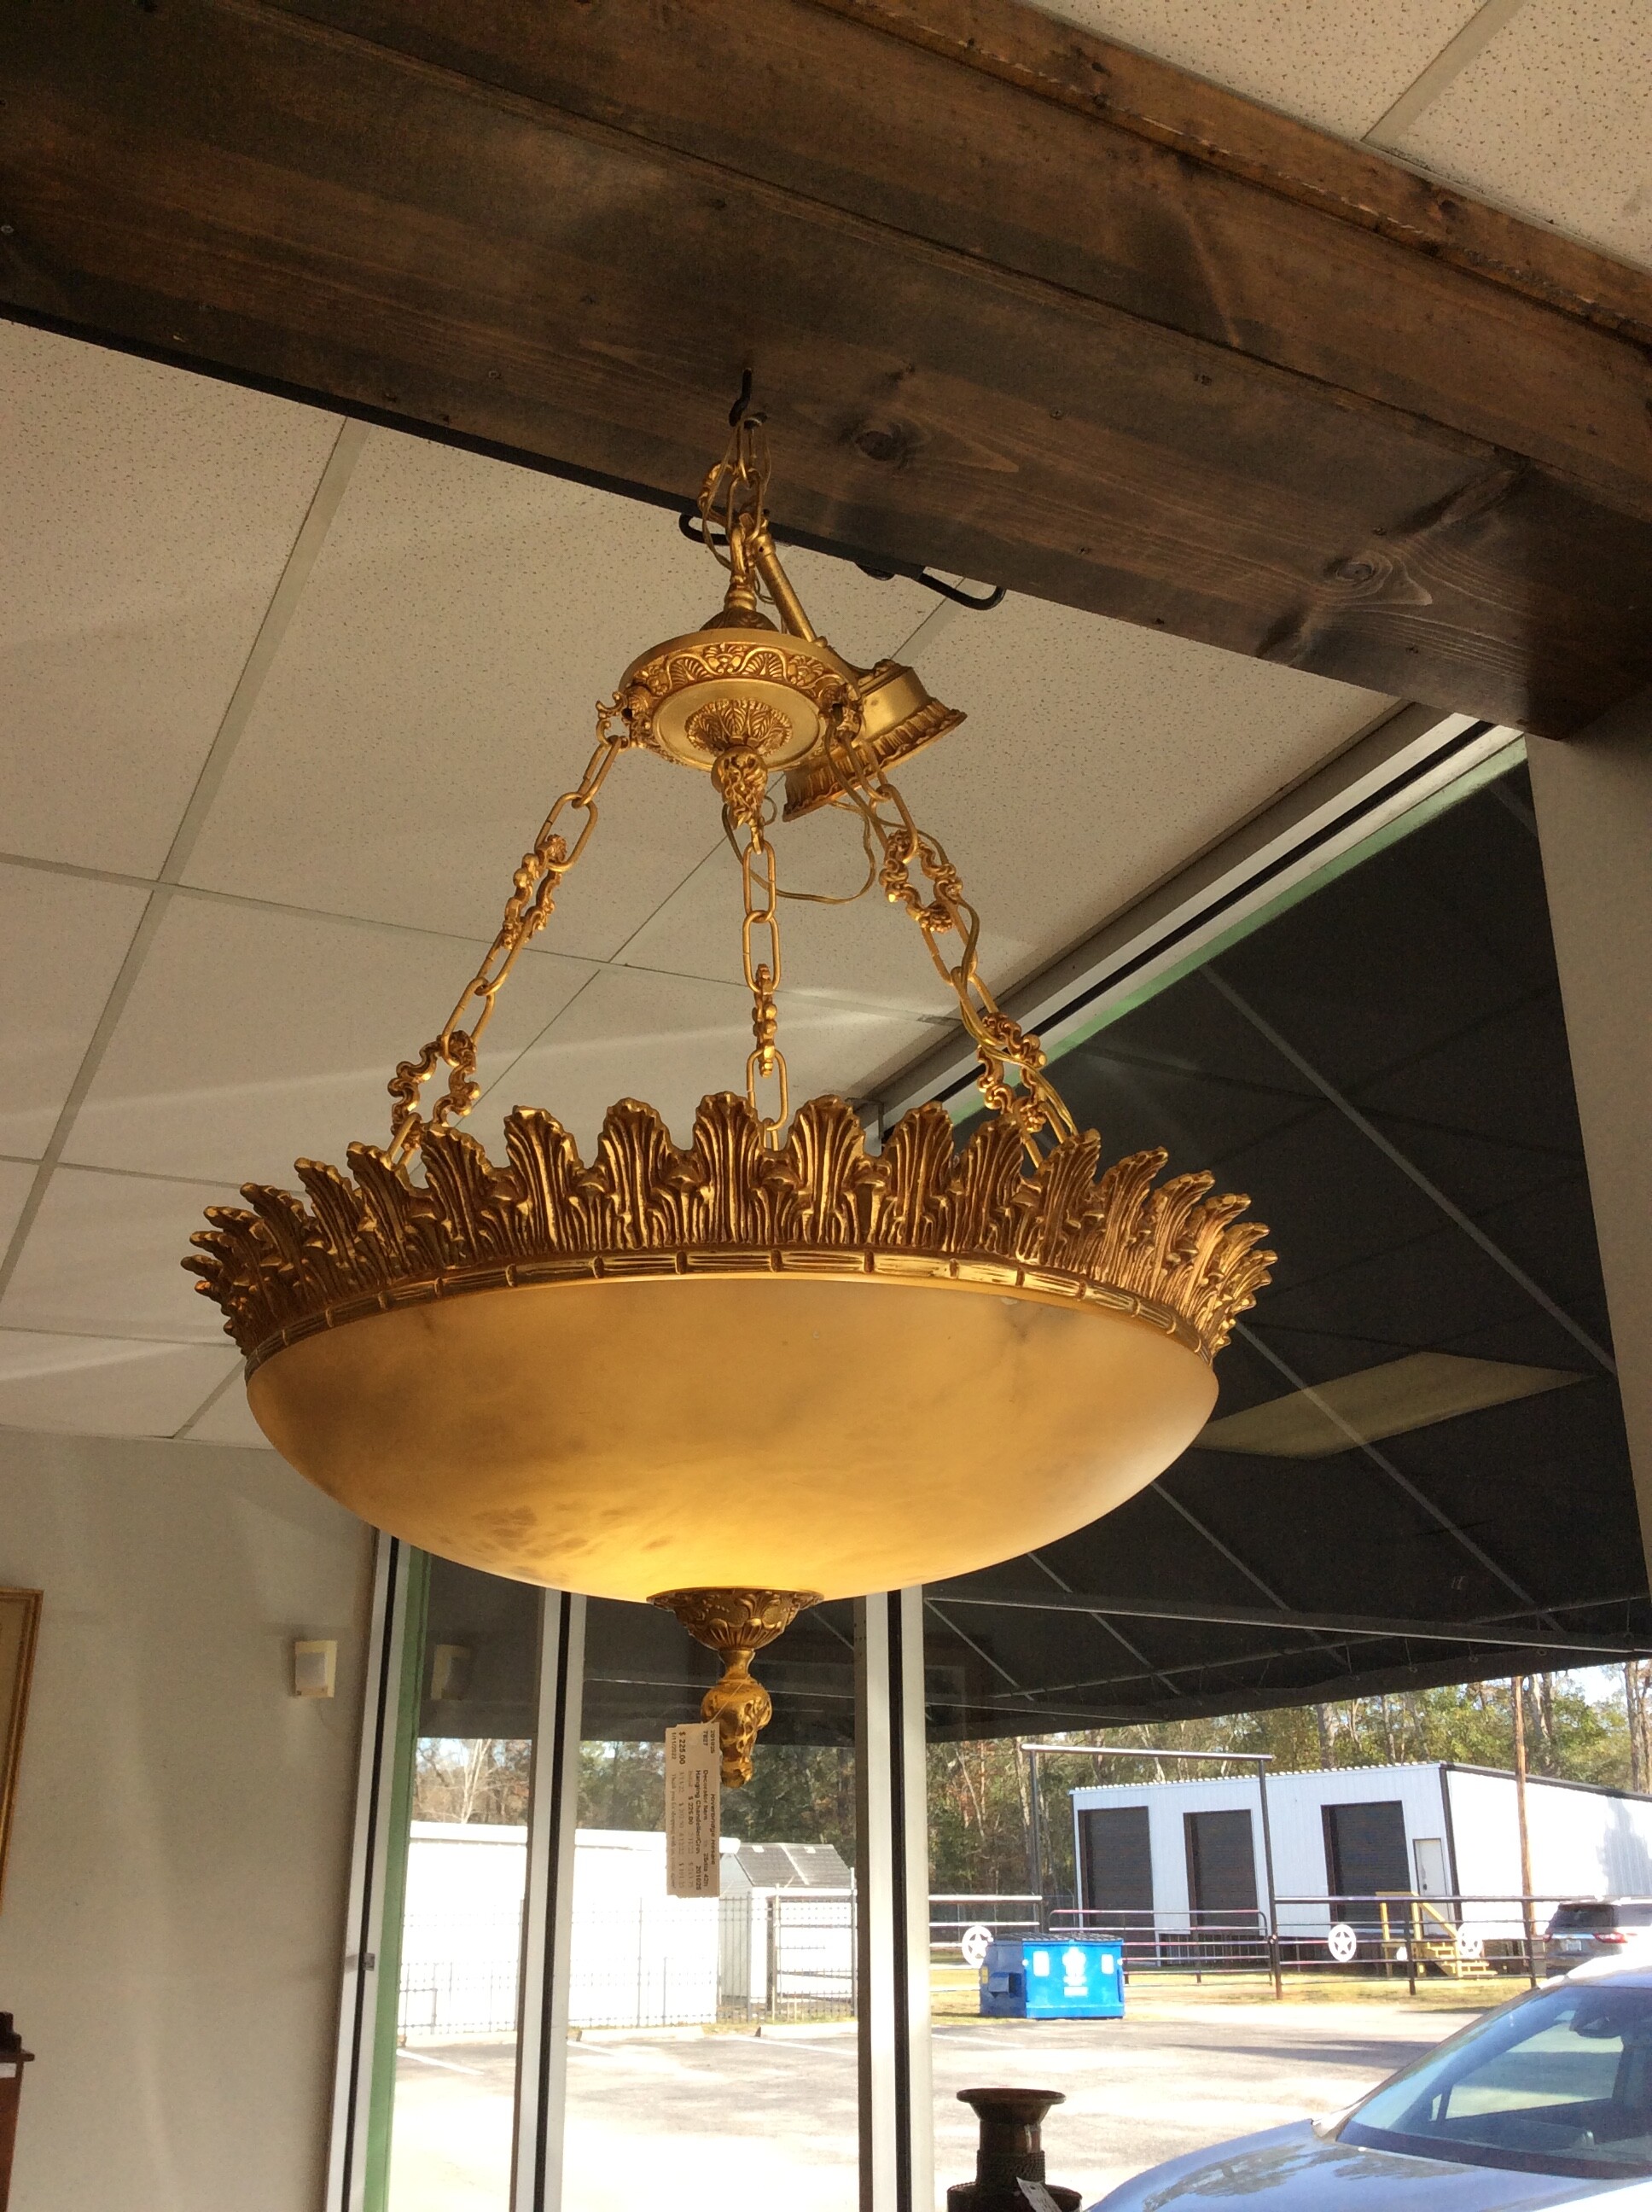 This is a pretty chandelier. It features a gold and white crown. Very vintagy looking.